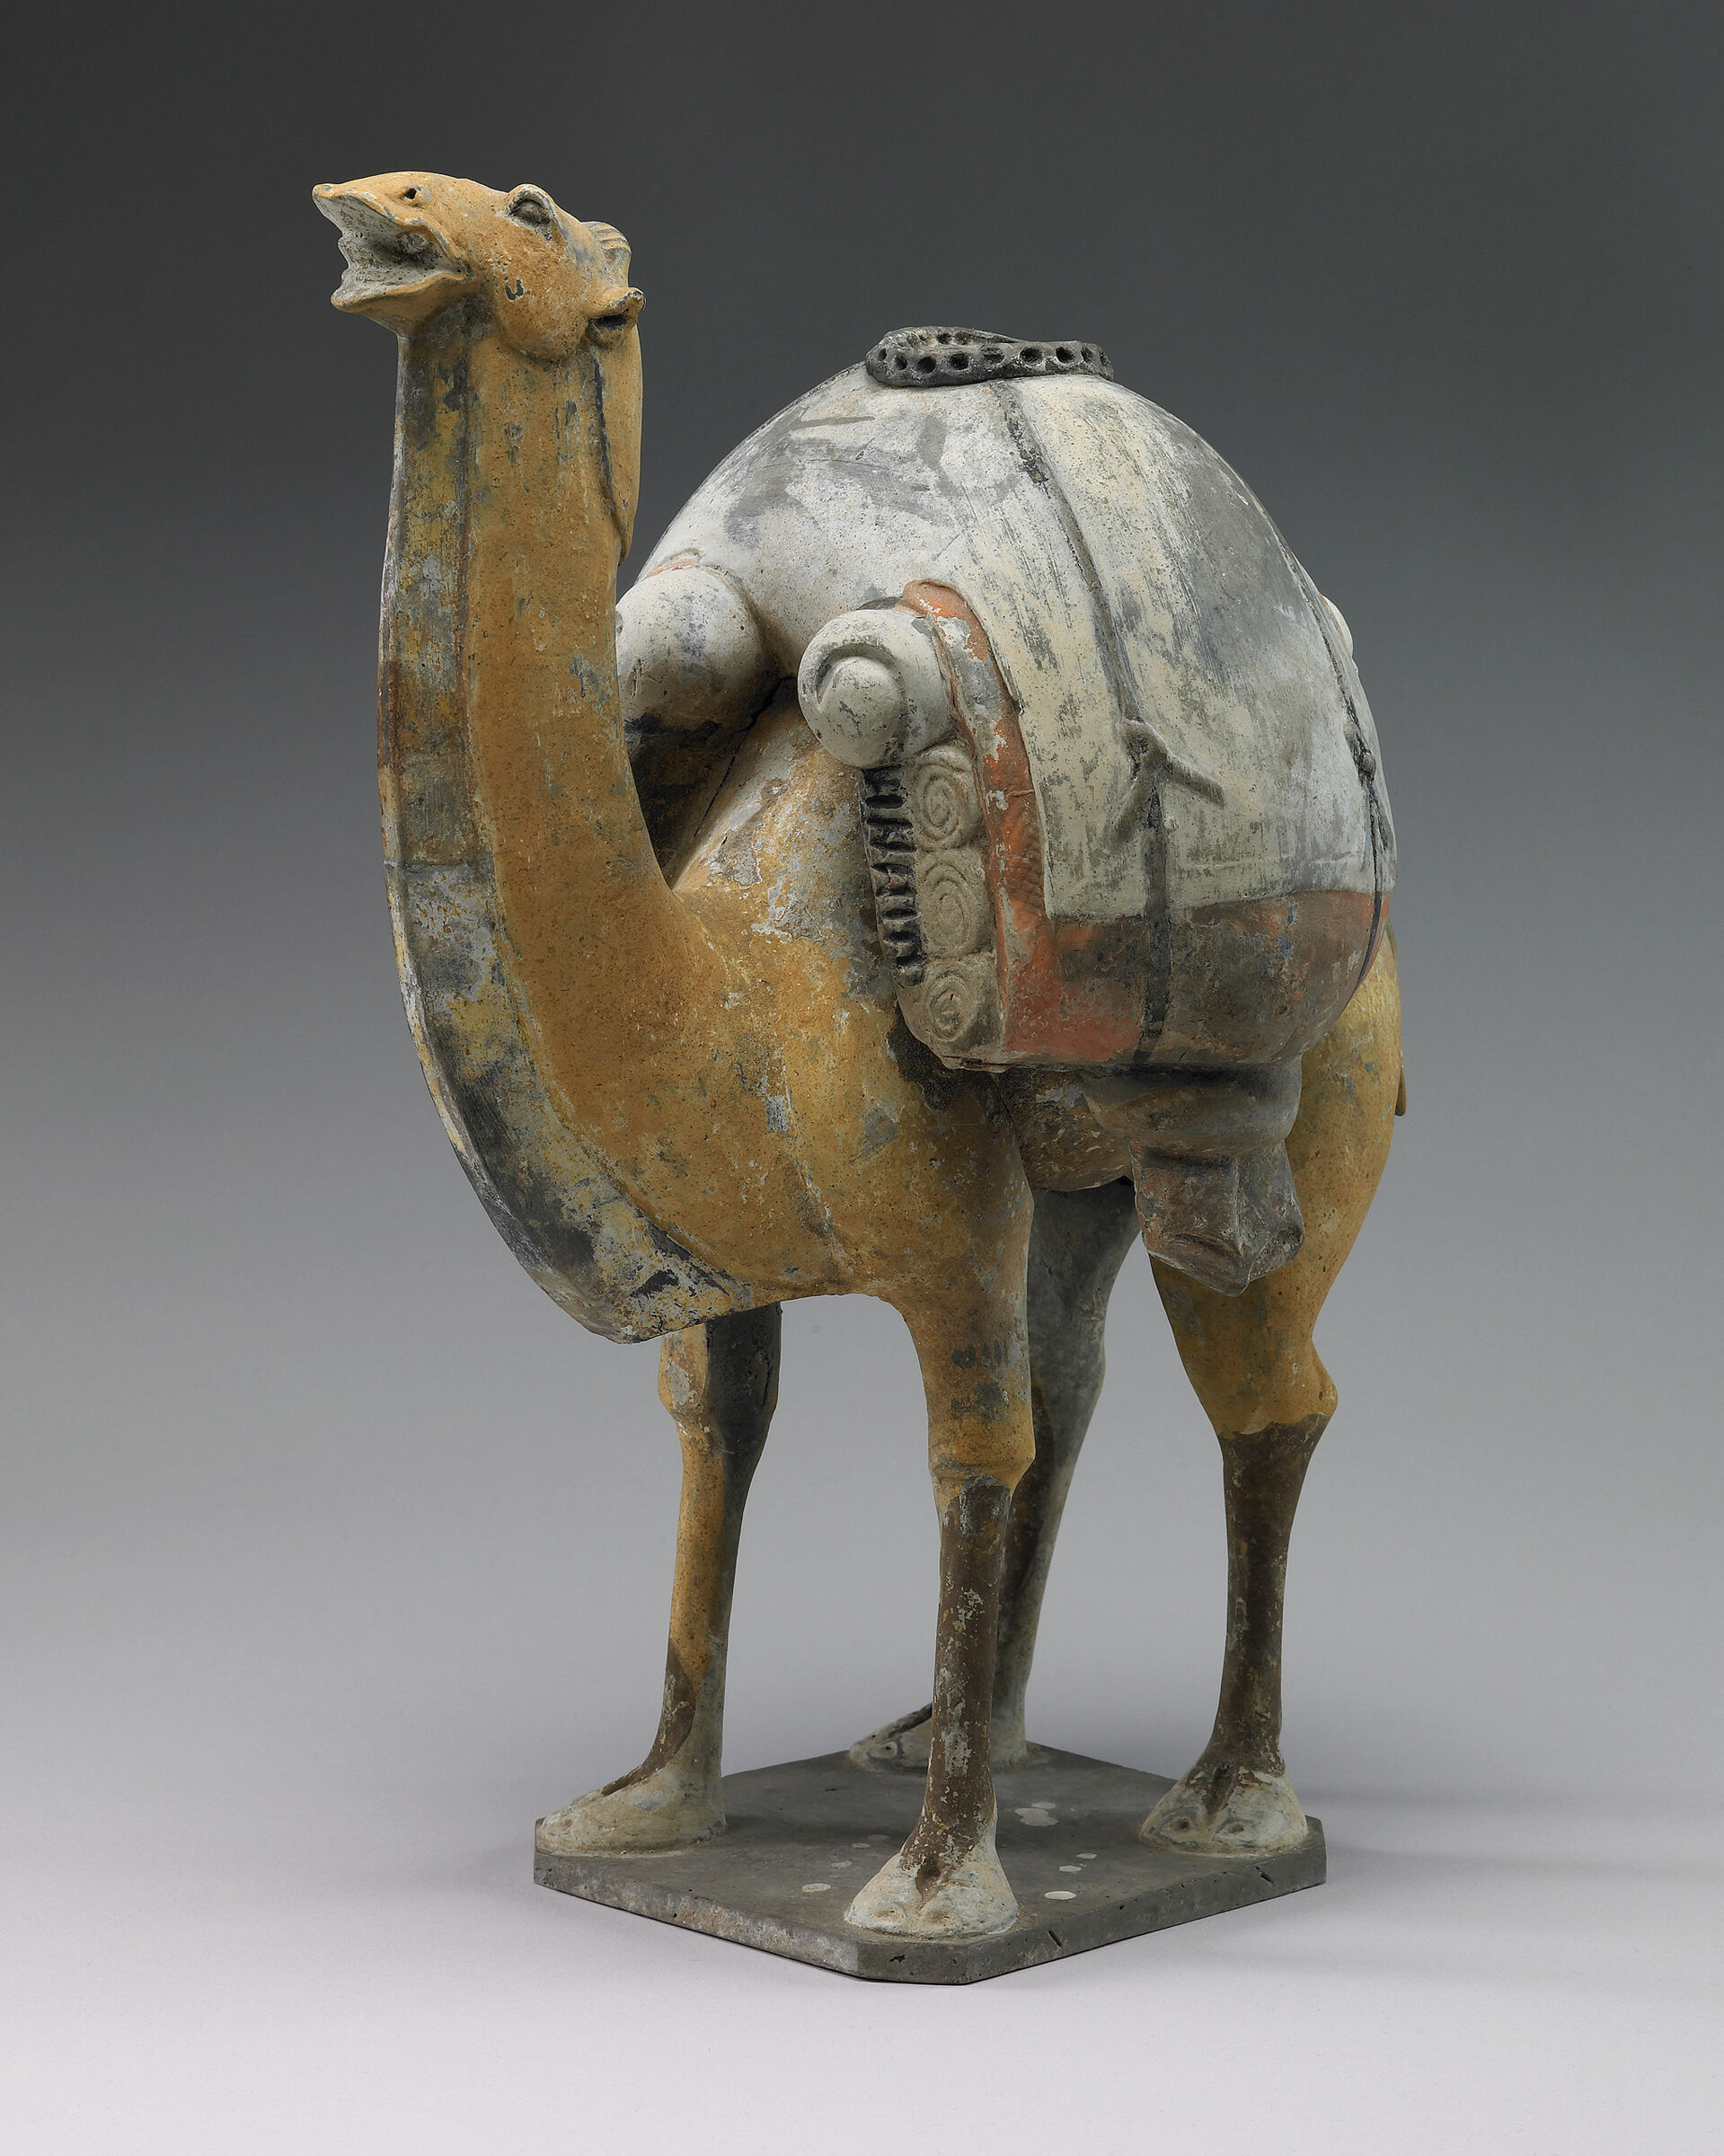 Buff-Colored Camel, From The Tomb Sculpture Set: Two Standing, Braying Camels, One Buff, One White, Their Backs Laden With Goods